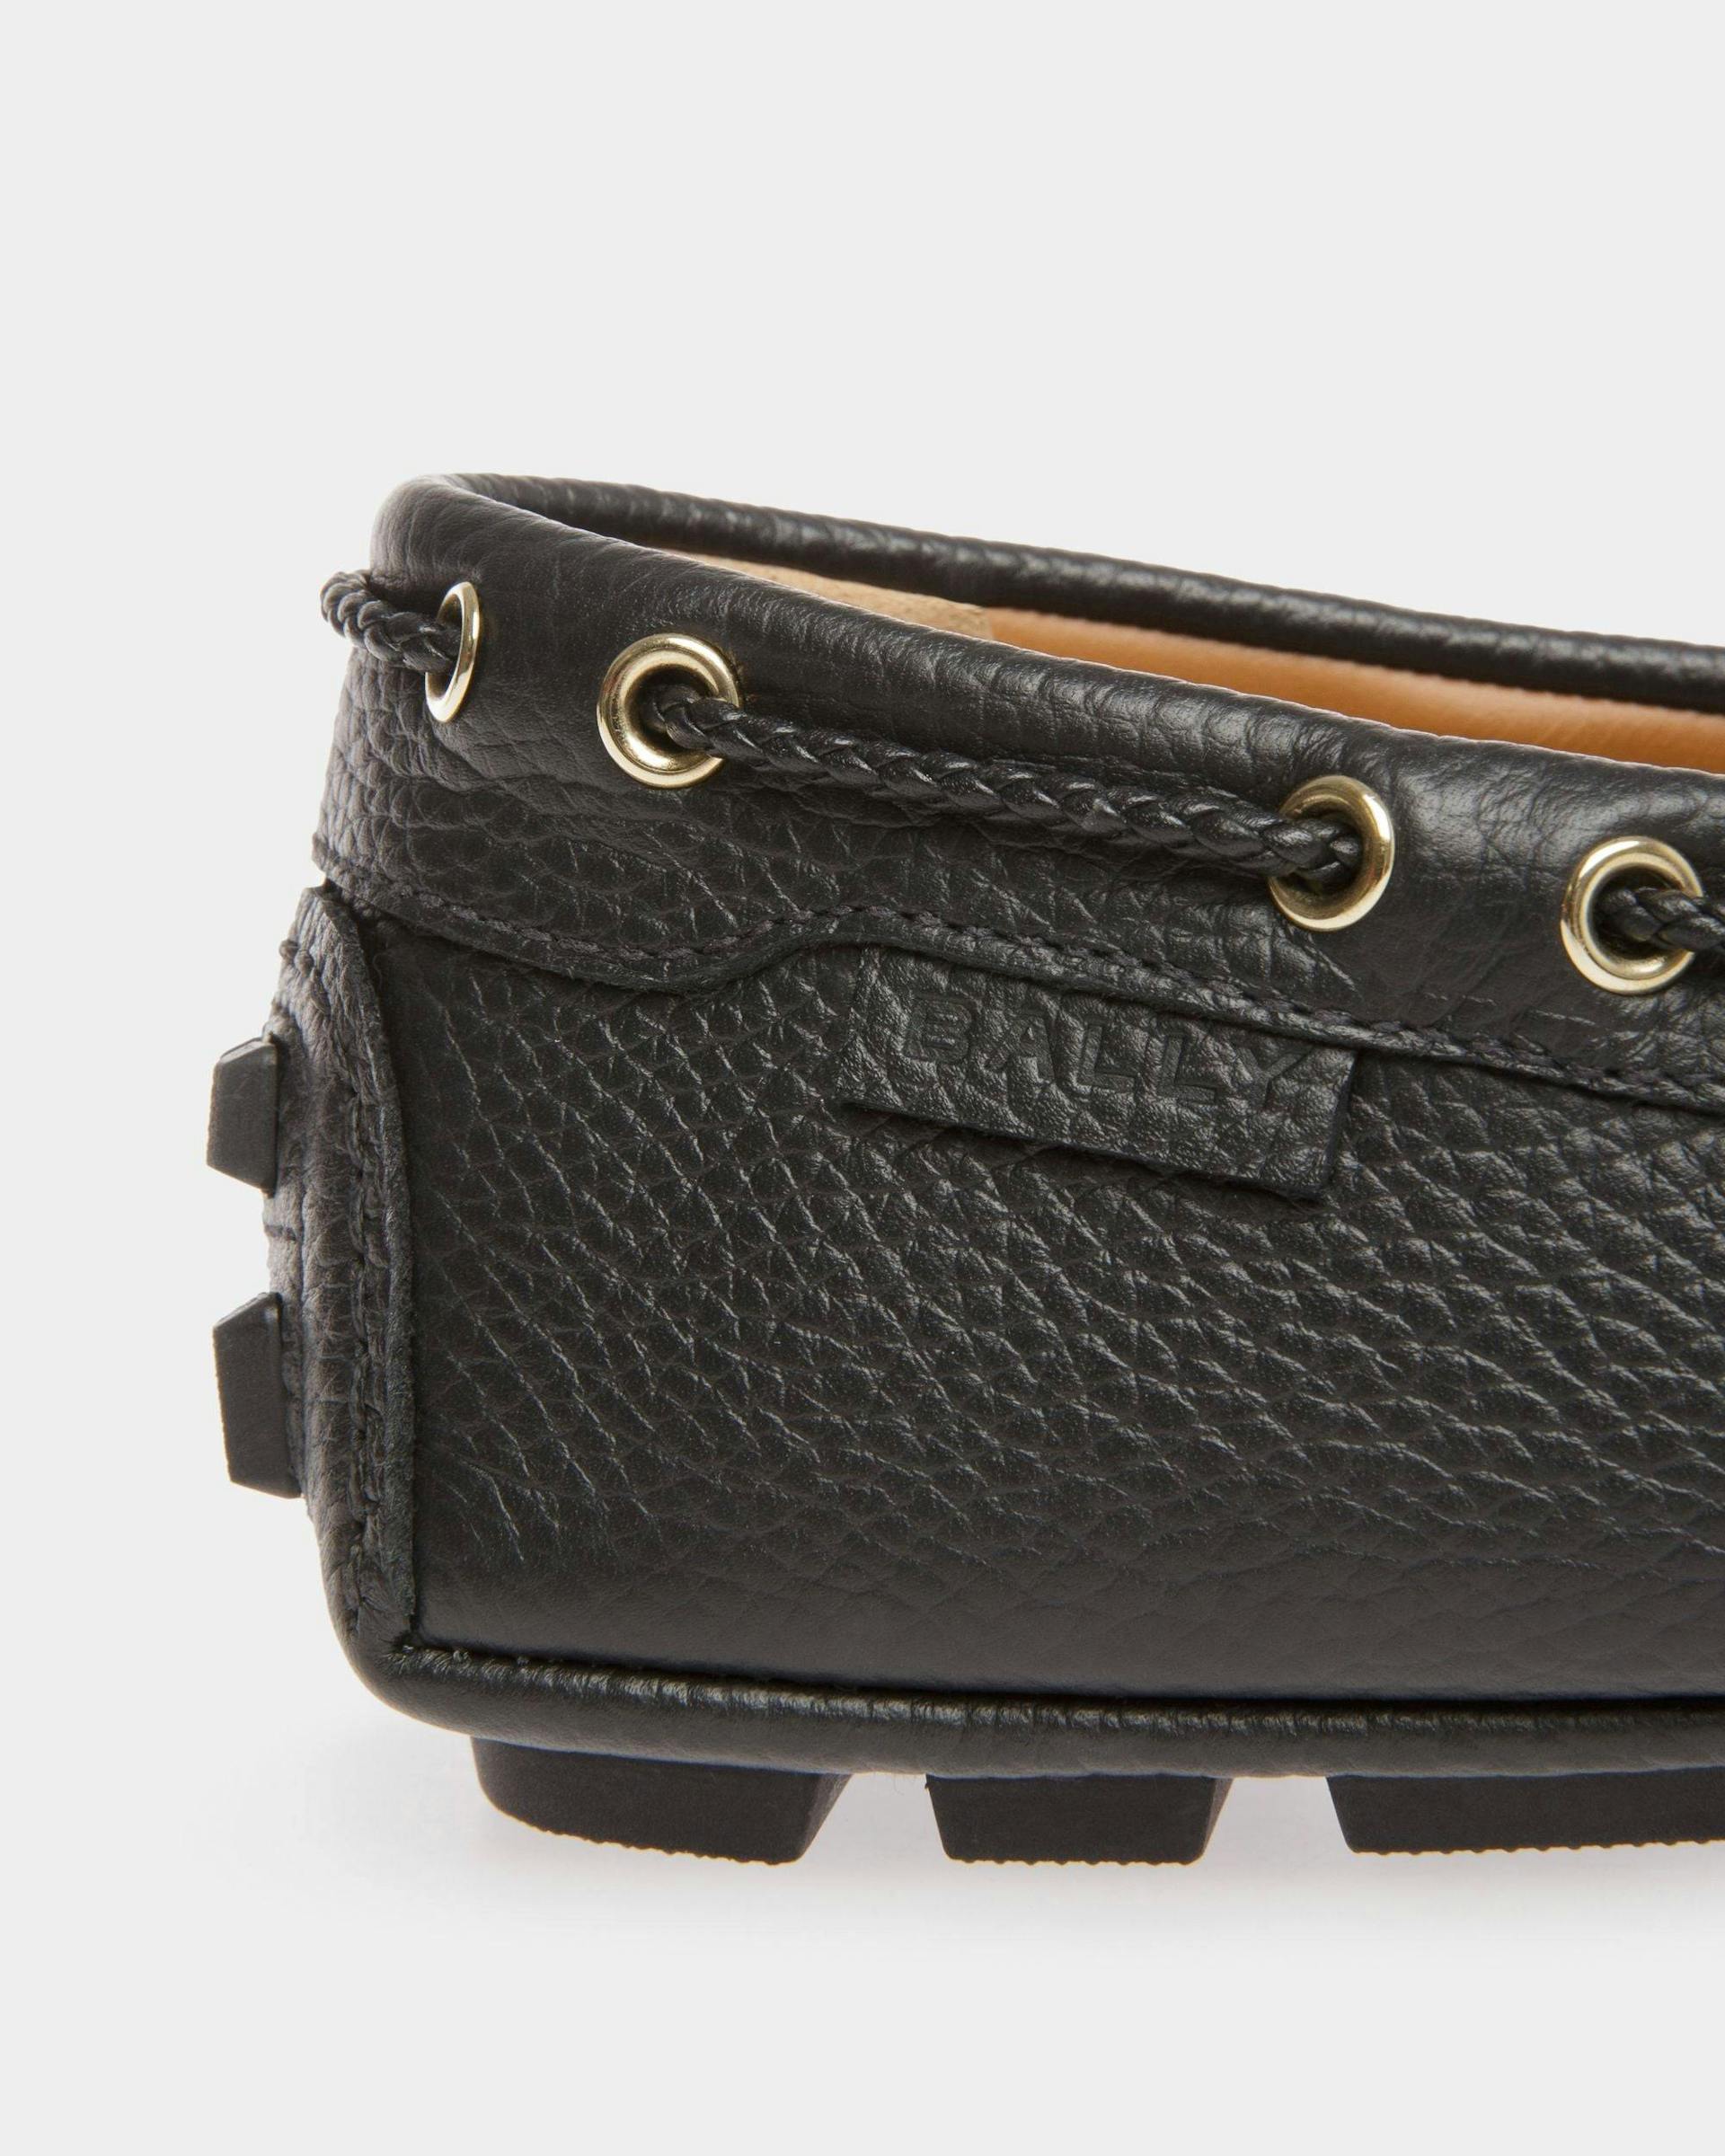 Men's Kerbs Drivers In Black Leather | Bally | Still Life Detail